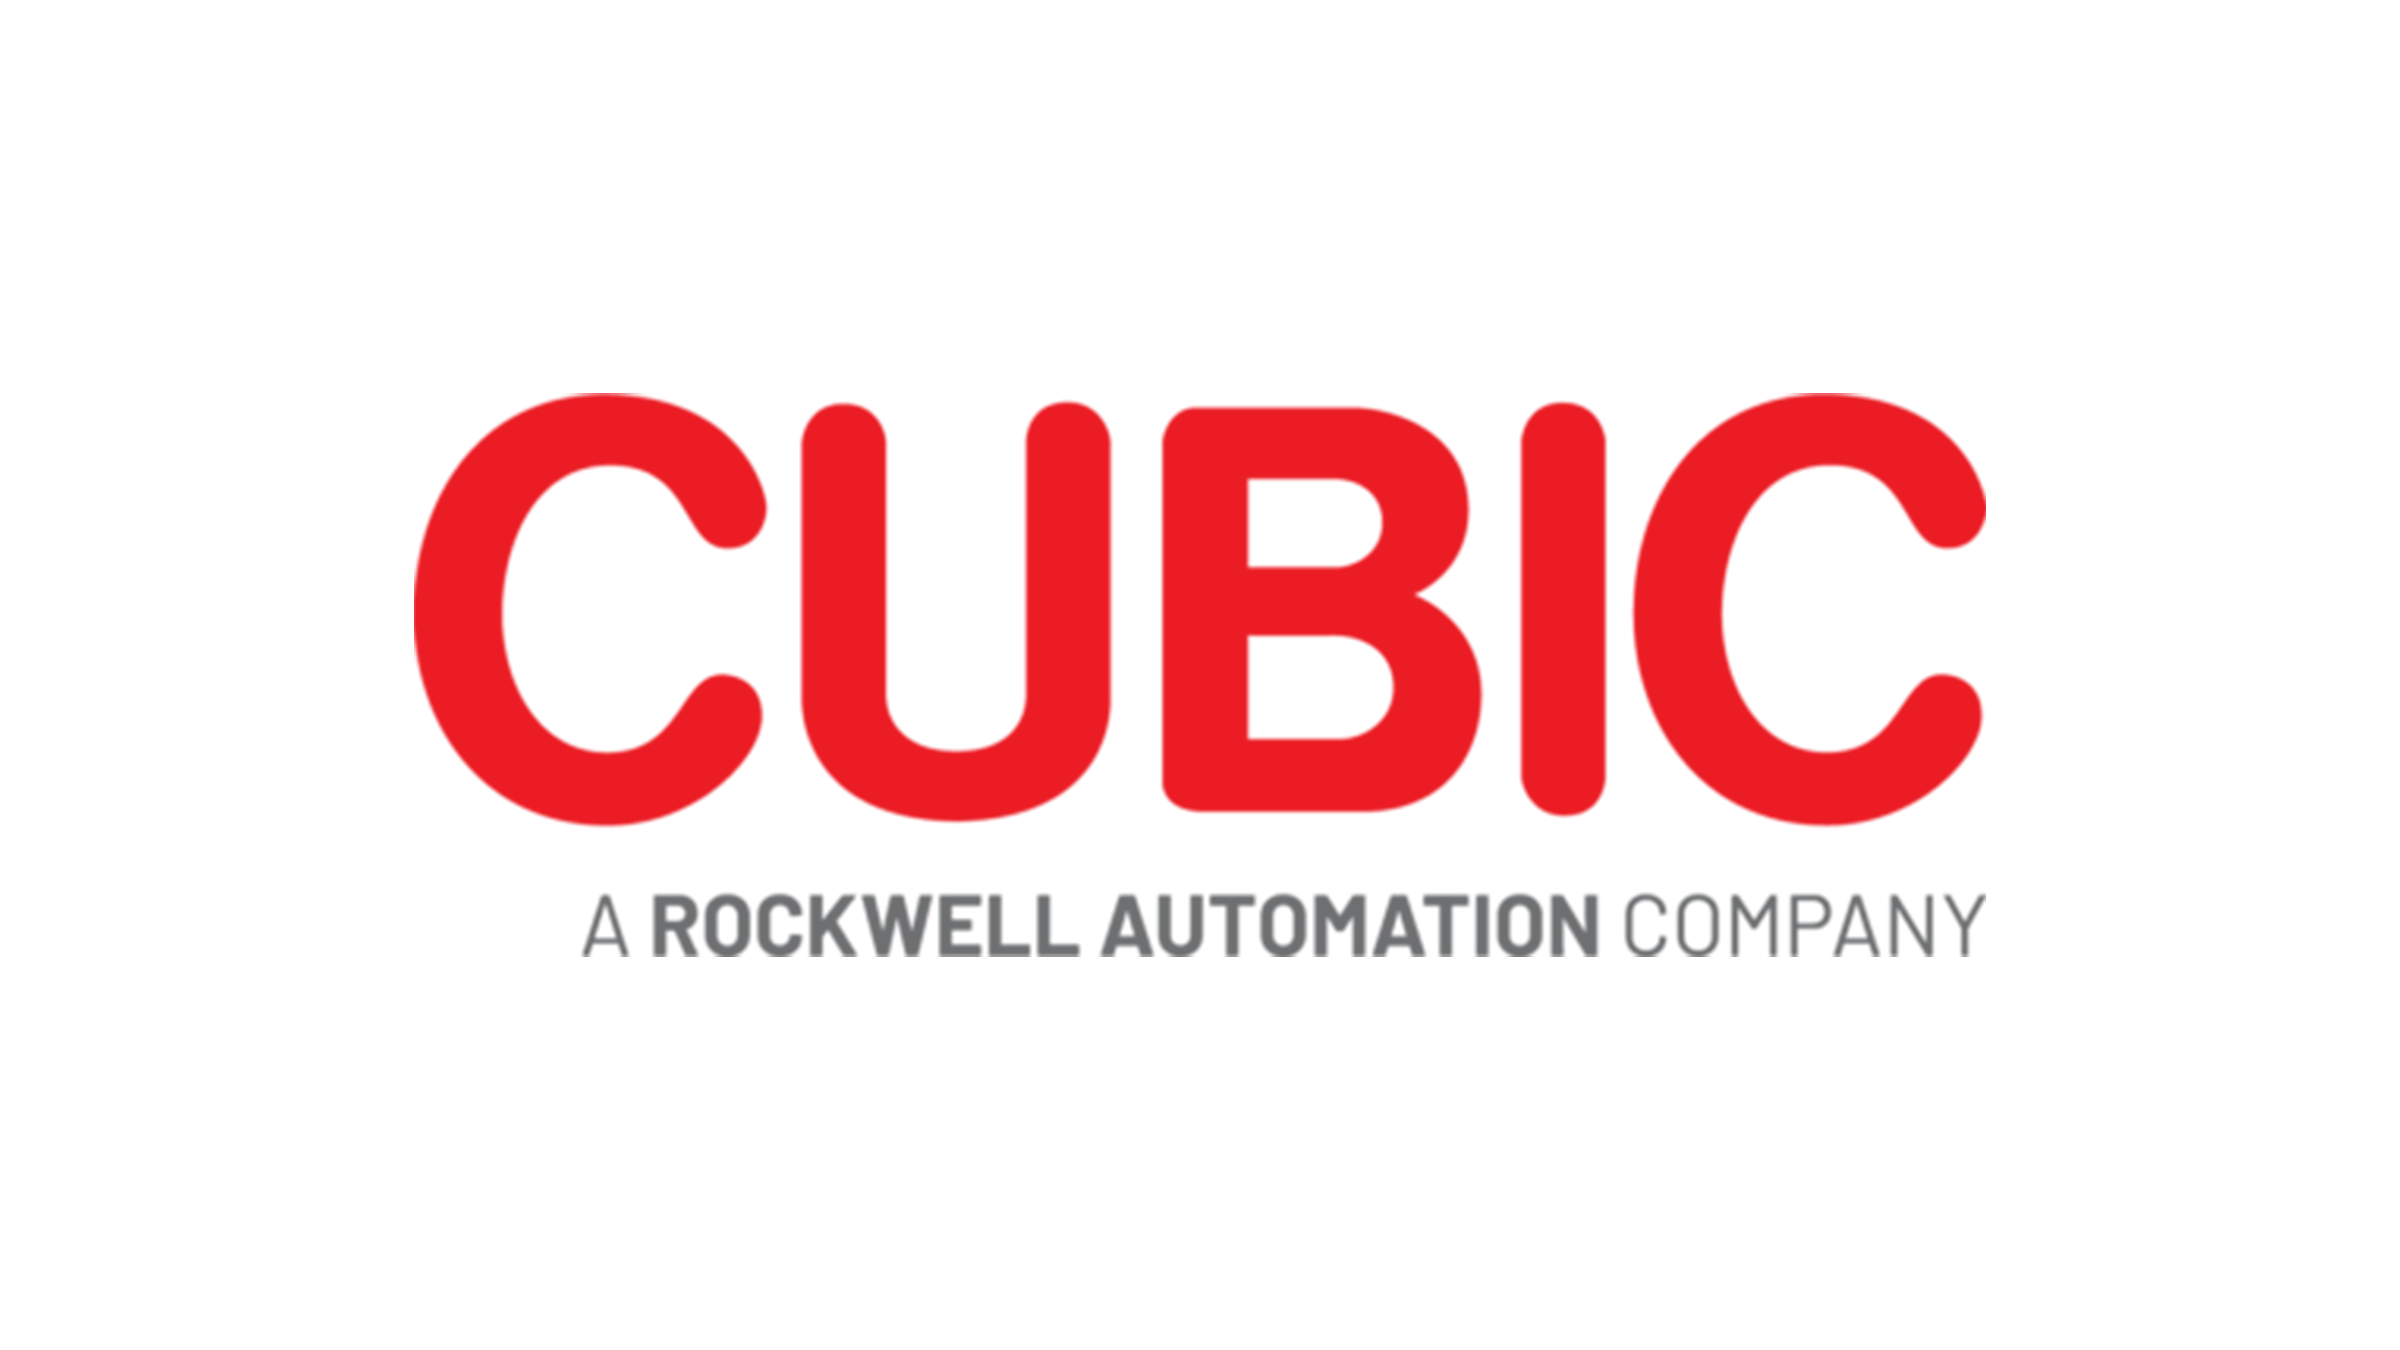 Cubic A Rockwell Automation Company logo